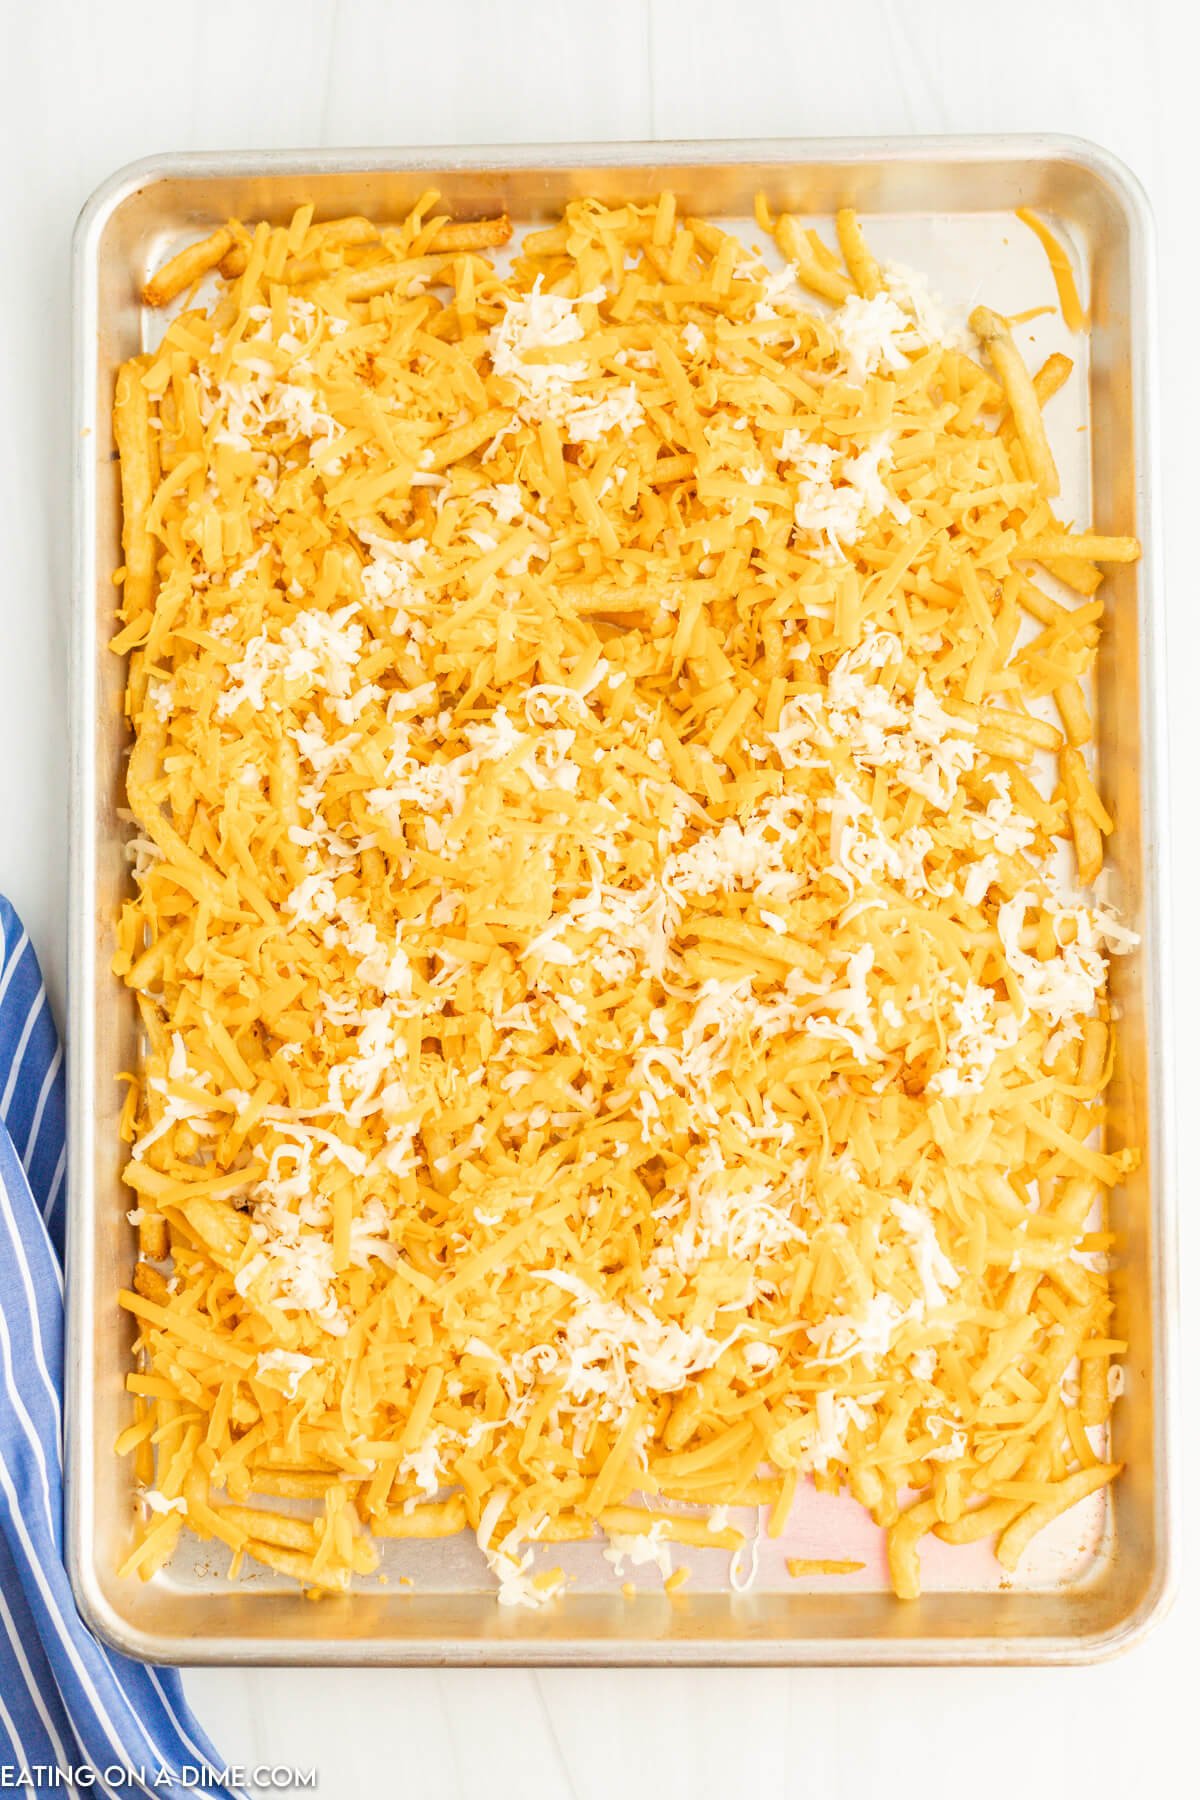 Topping fries with shredded cheese